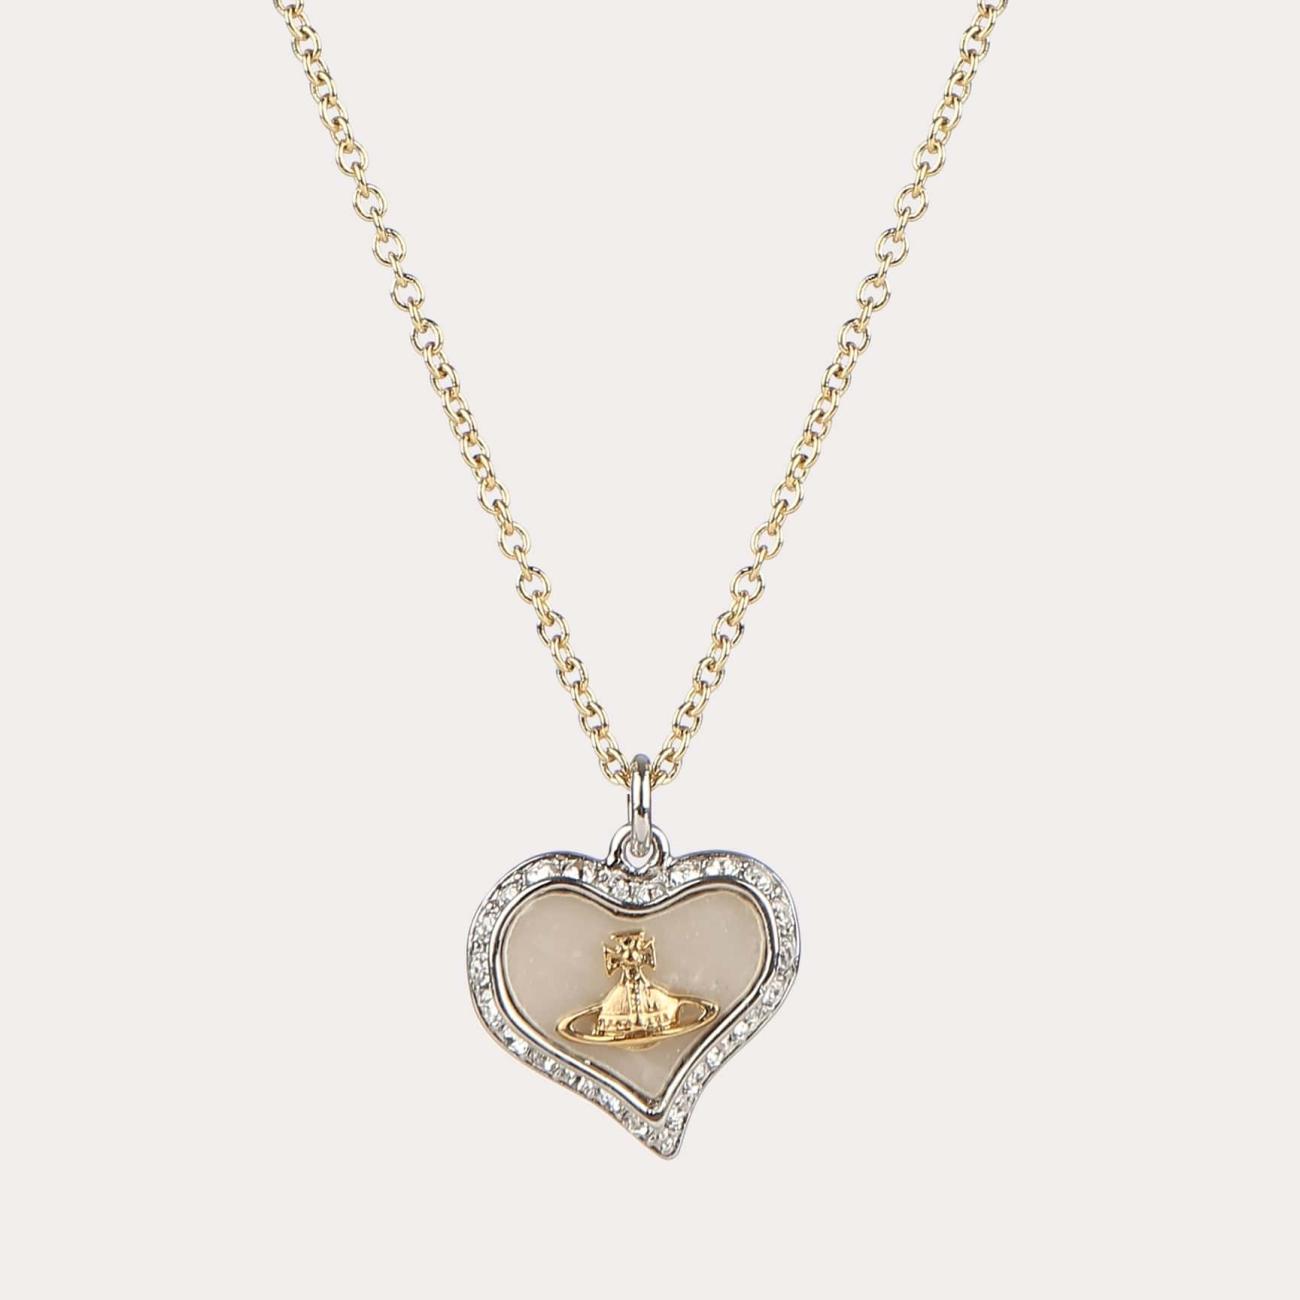 ORB Petra Heart Pendant Chain Necklace